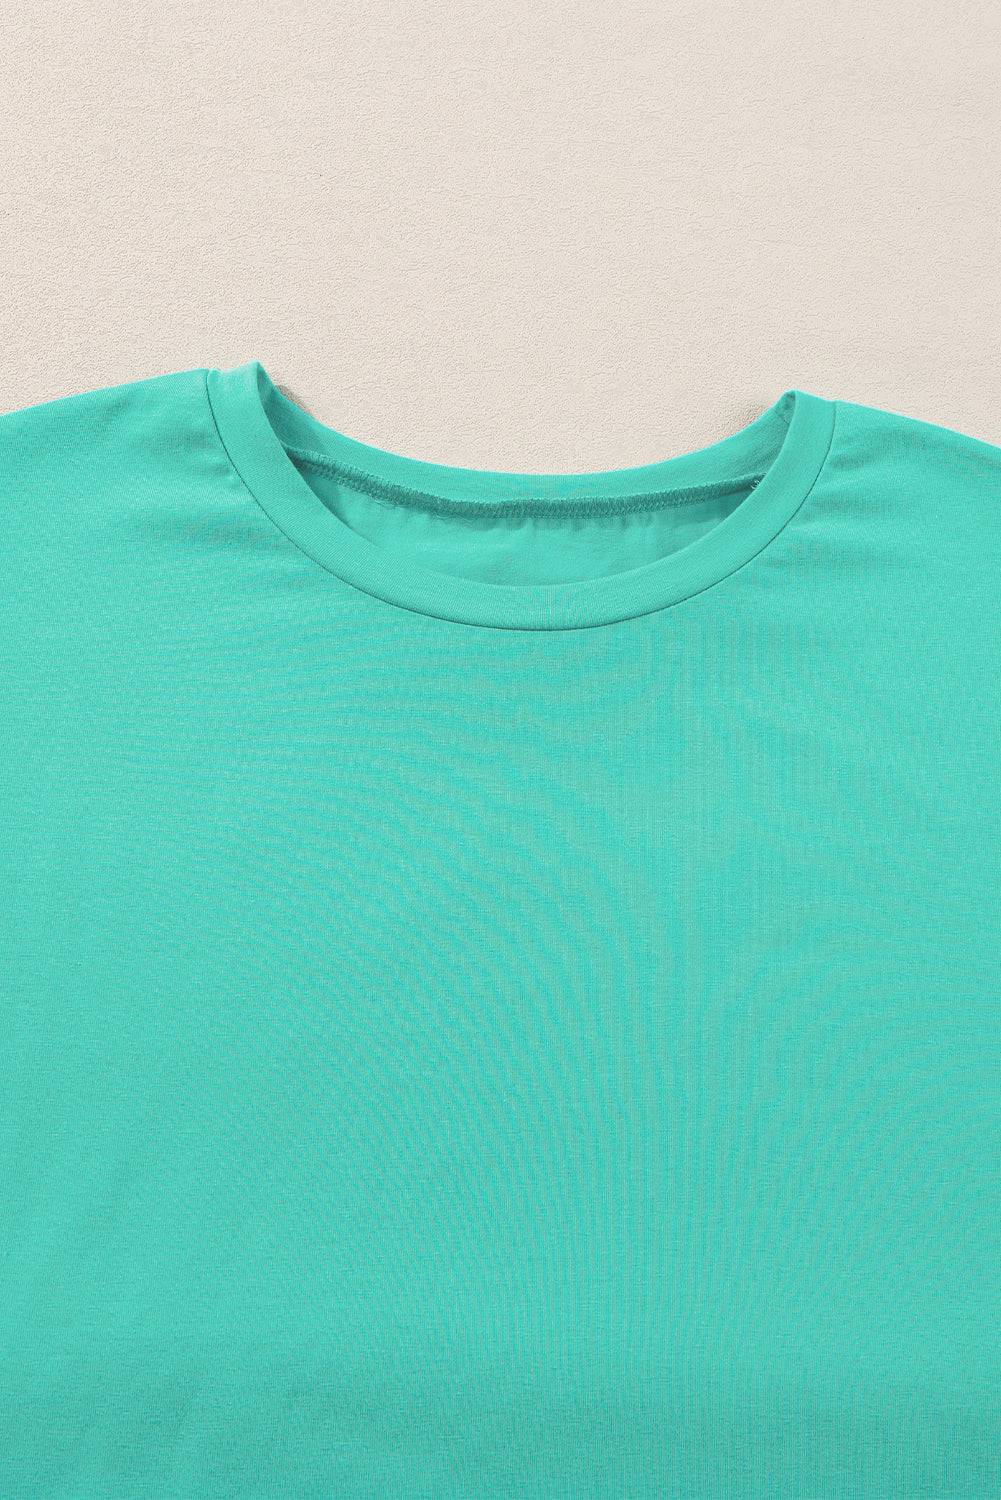 a close up of a green shirt on a white surface